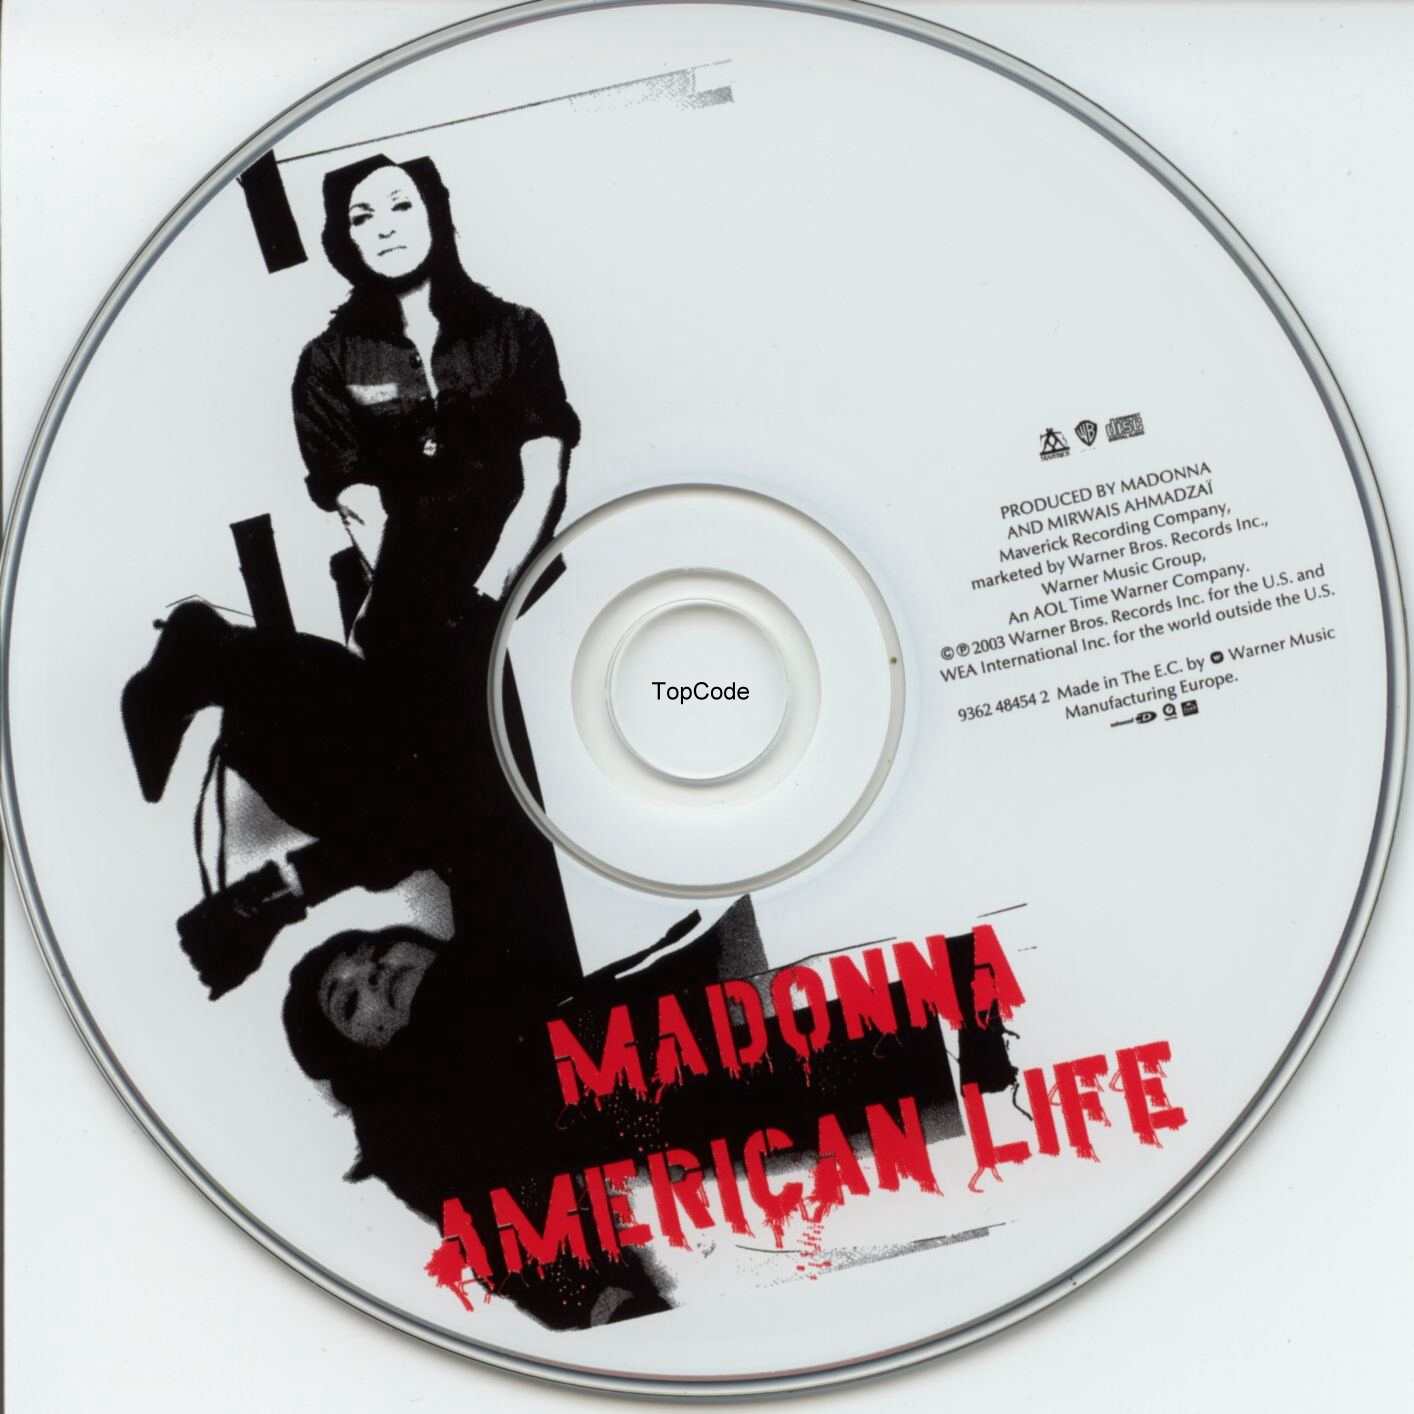 Madonna American Life Cd Cd Covers Cover Century Over 500 000 Album Art Covers For Free